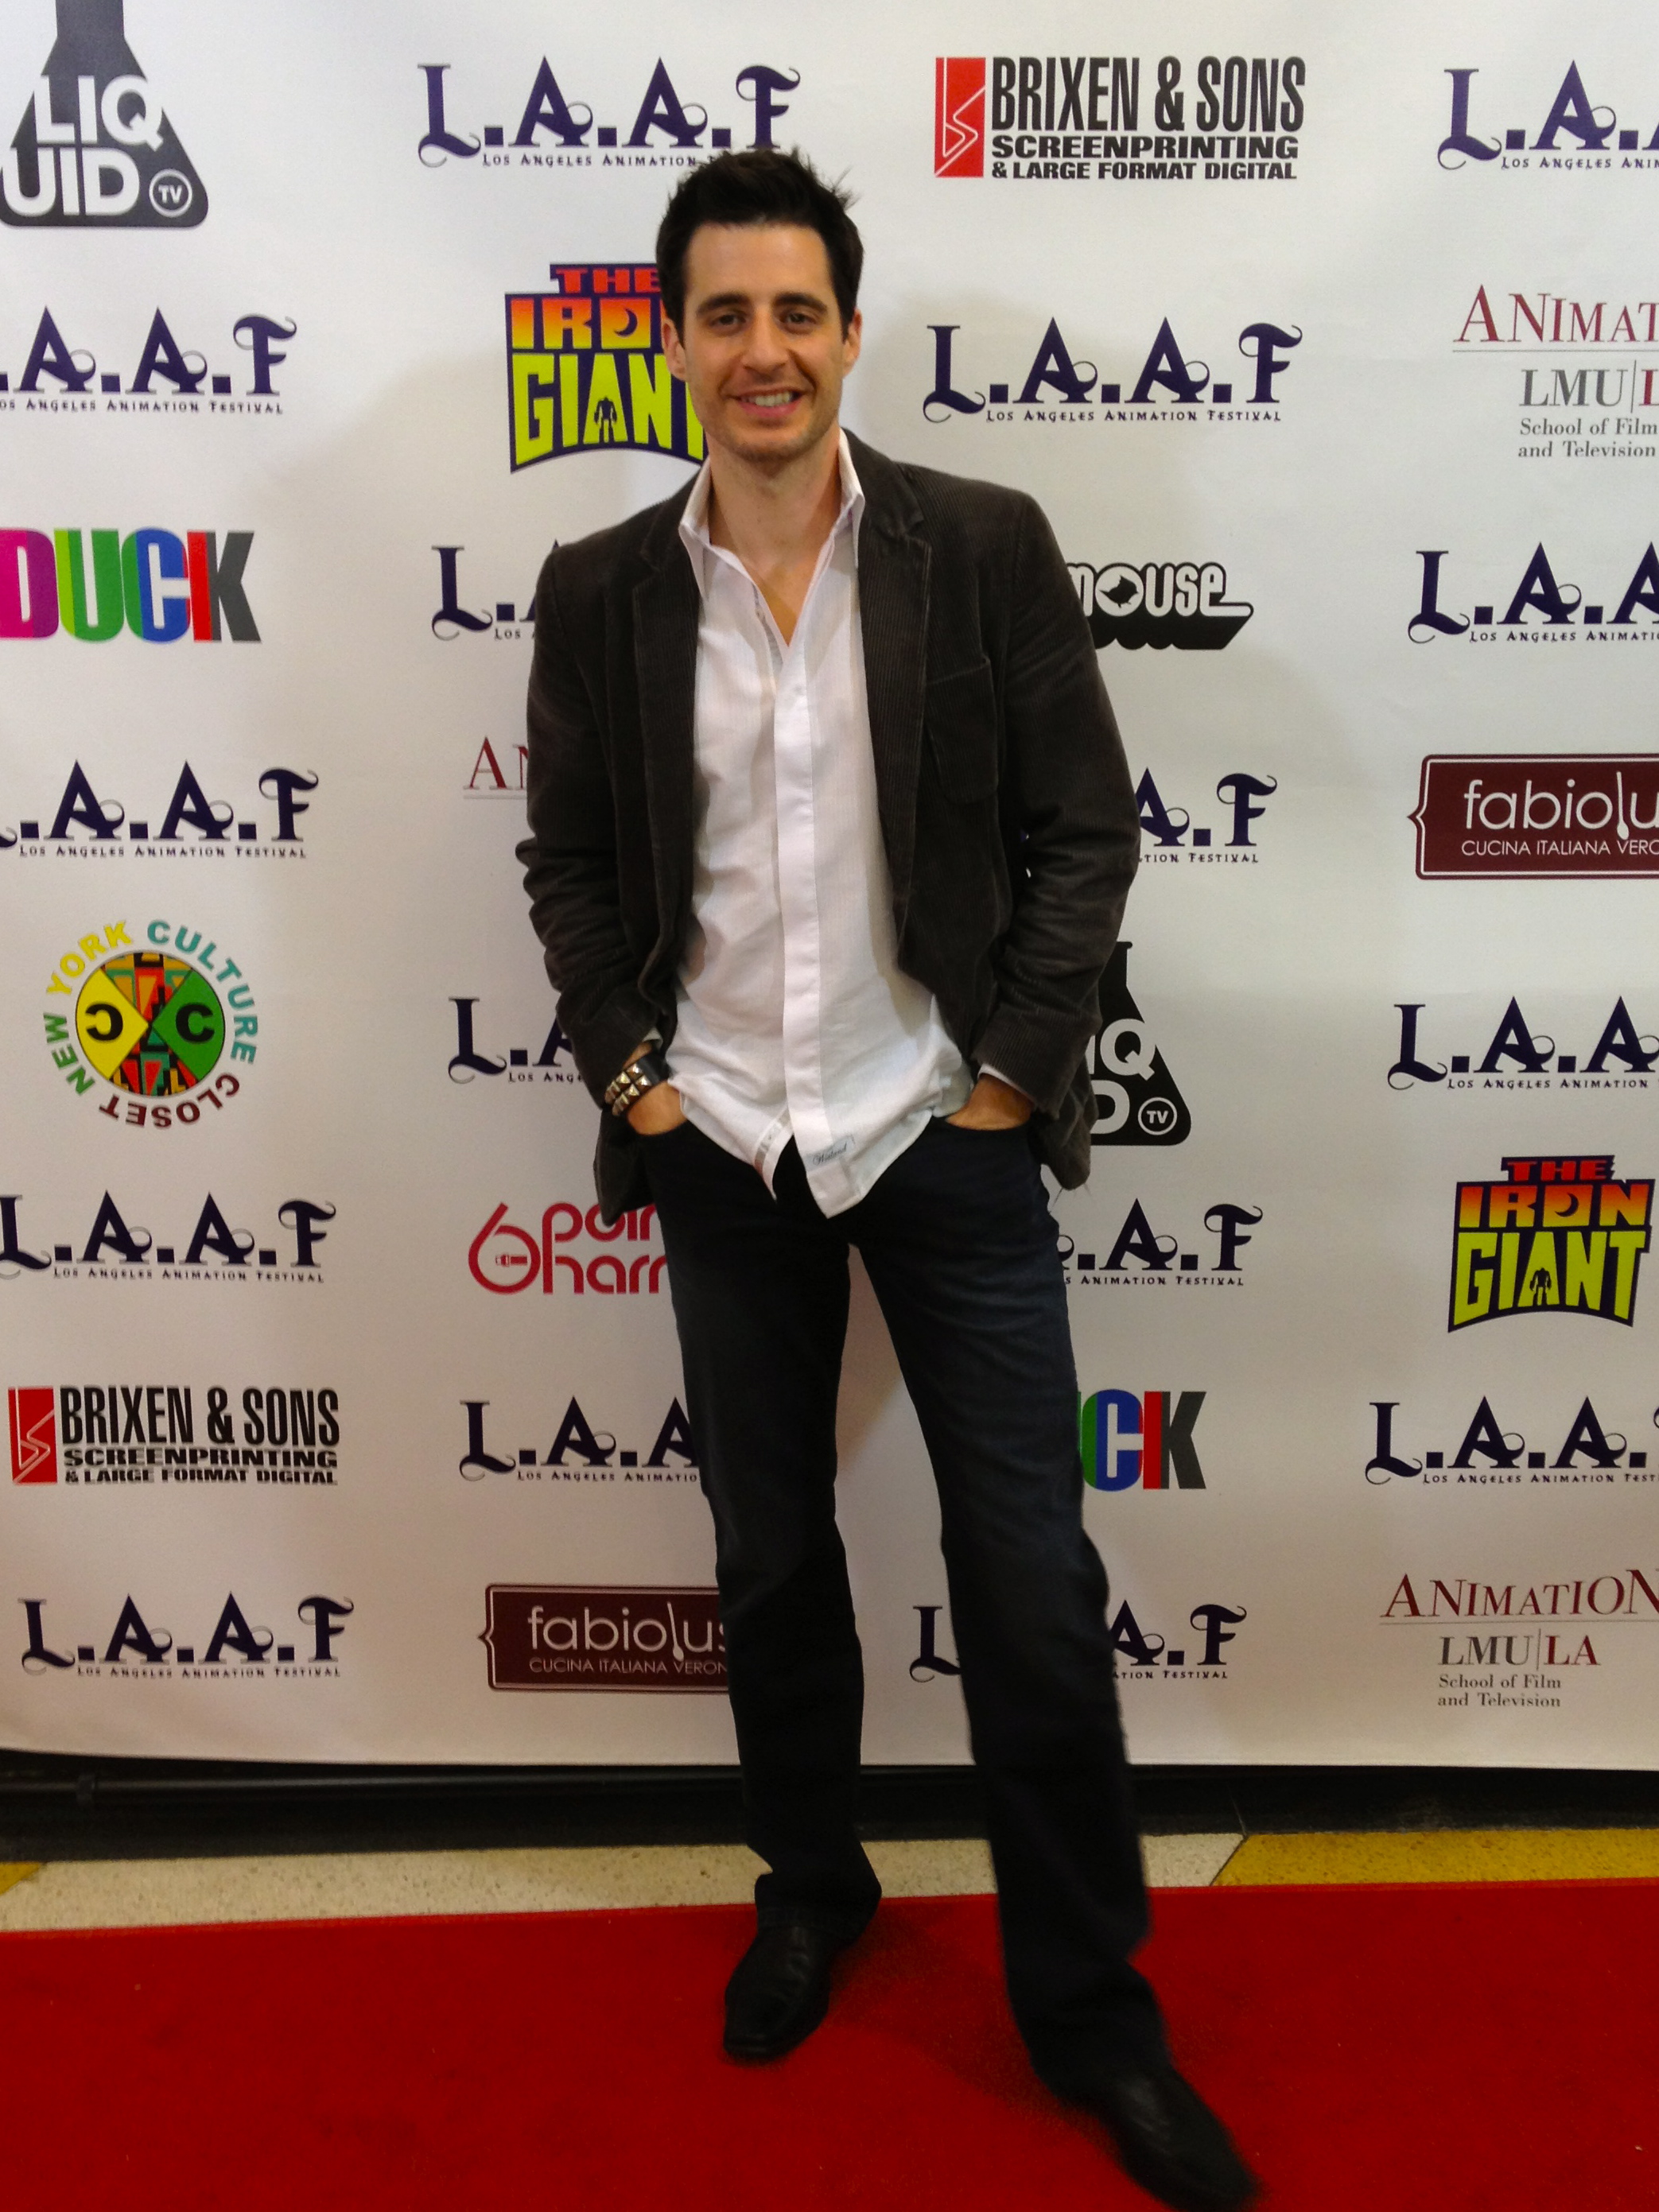 Los Angeles Animation Festival - March 9, 2012.